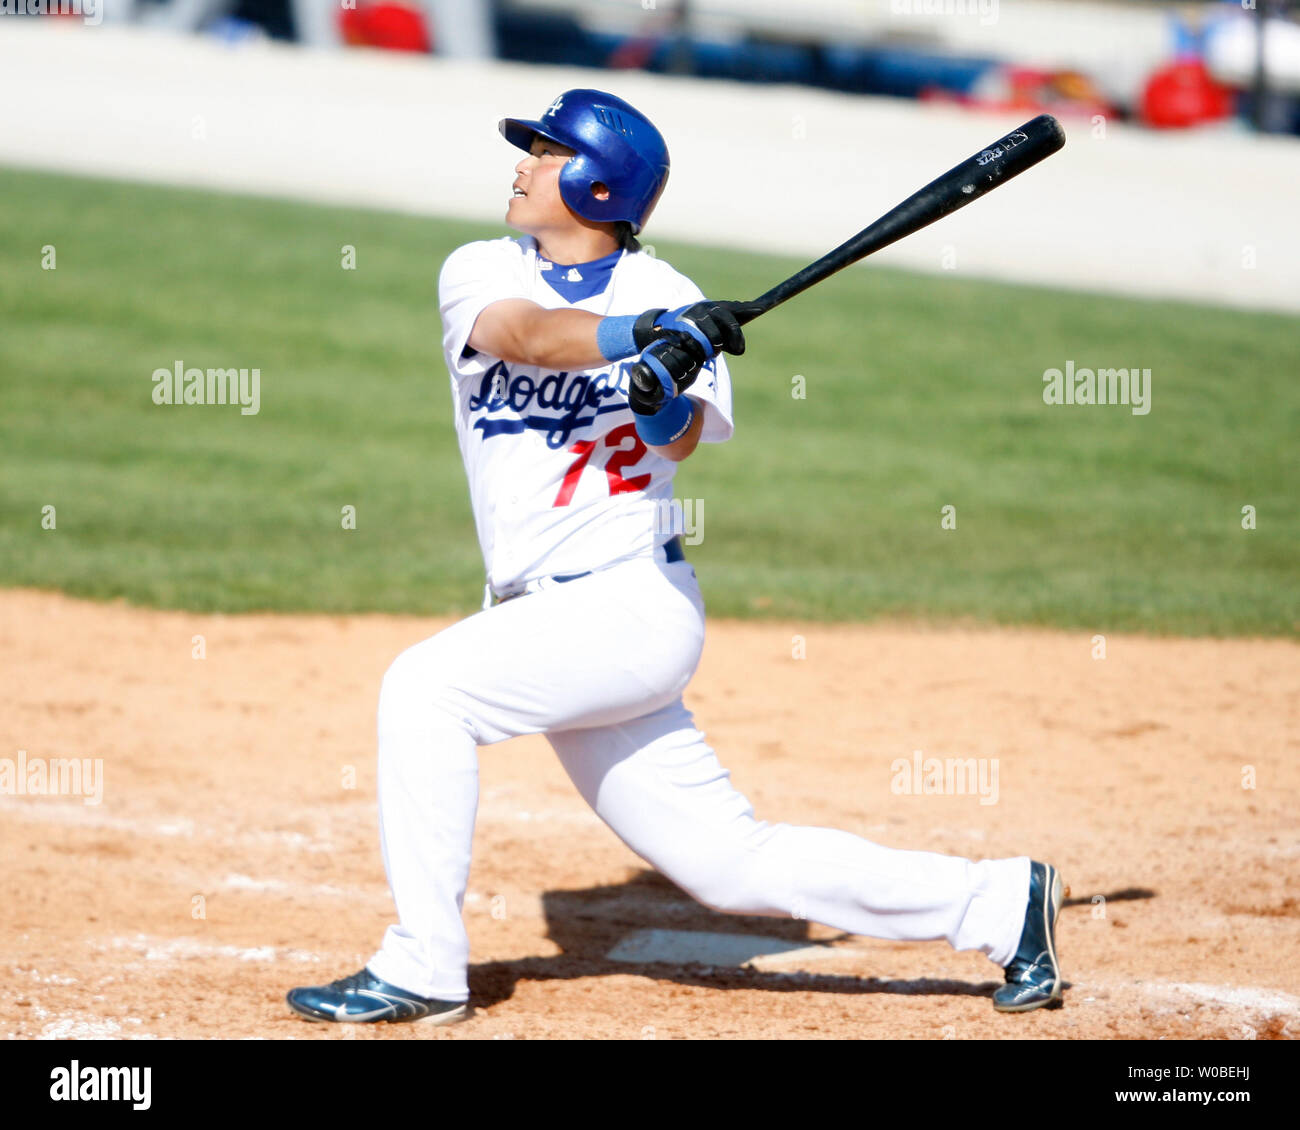 Los Angeles Dodgers Chin Lung Hu of Taiwan pops up during against the St. Louis Cardinals at Dodgertown in Vero Beach, Florida on March 7, 2007. The Cardinals beat the Dodgers 11-1.  (UPI Photo /Jon SooHoo) Stock Photo